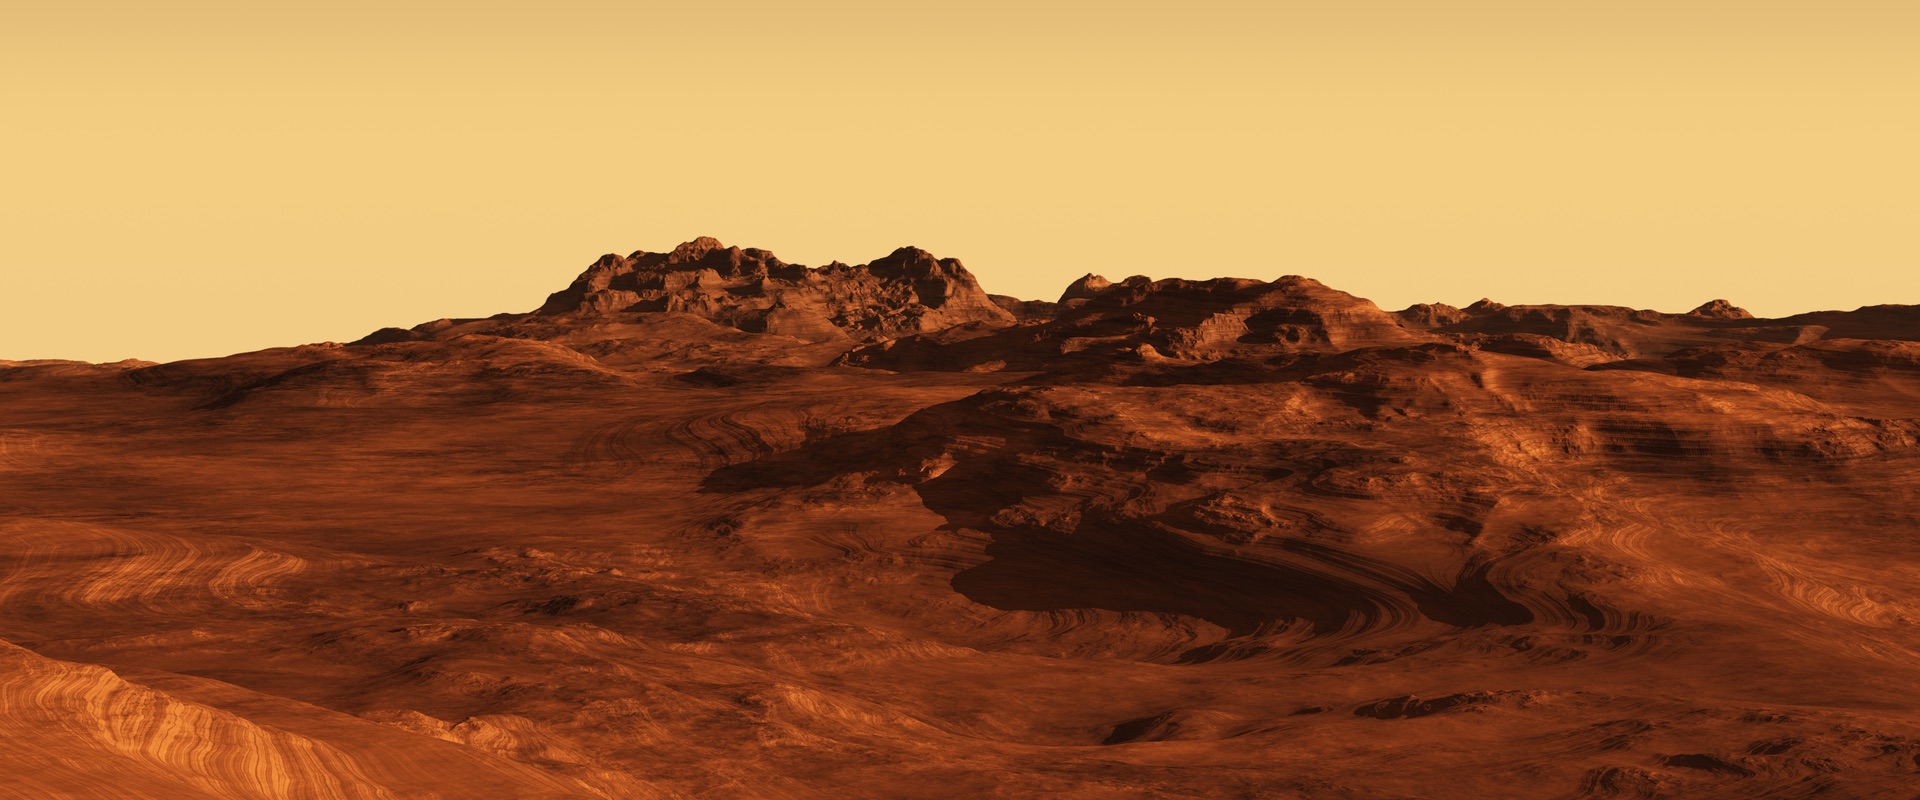 Image of Mars surface